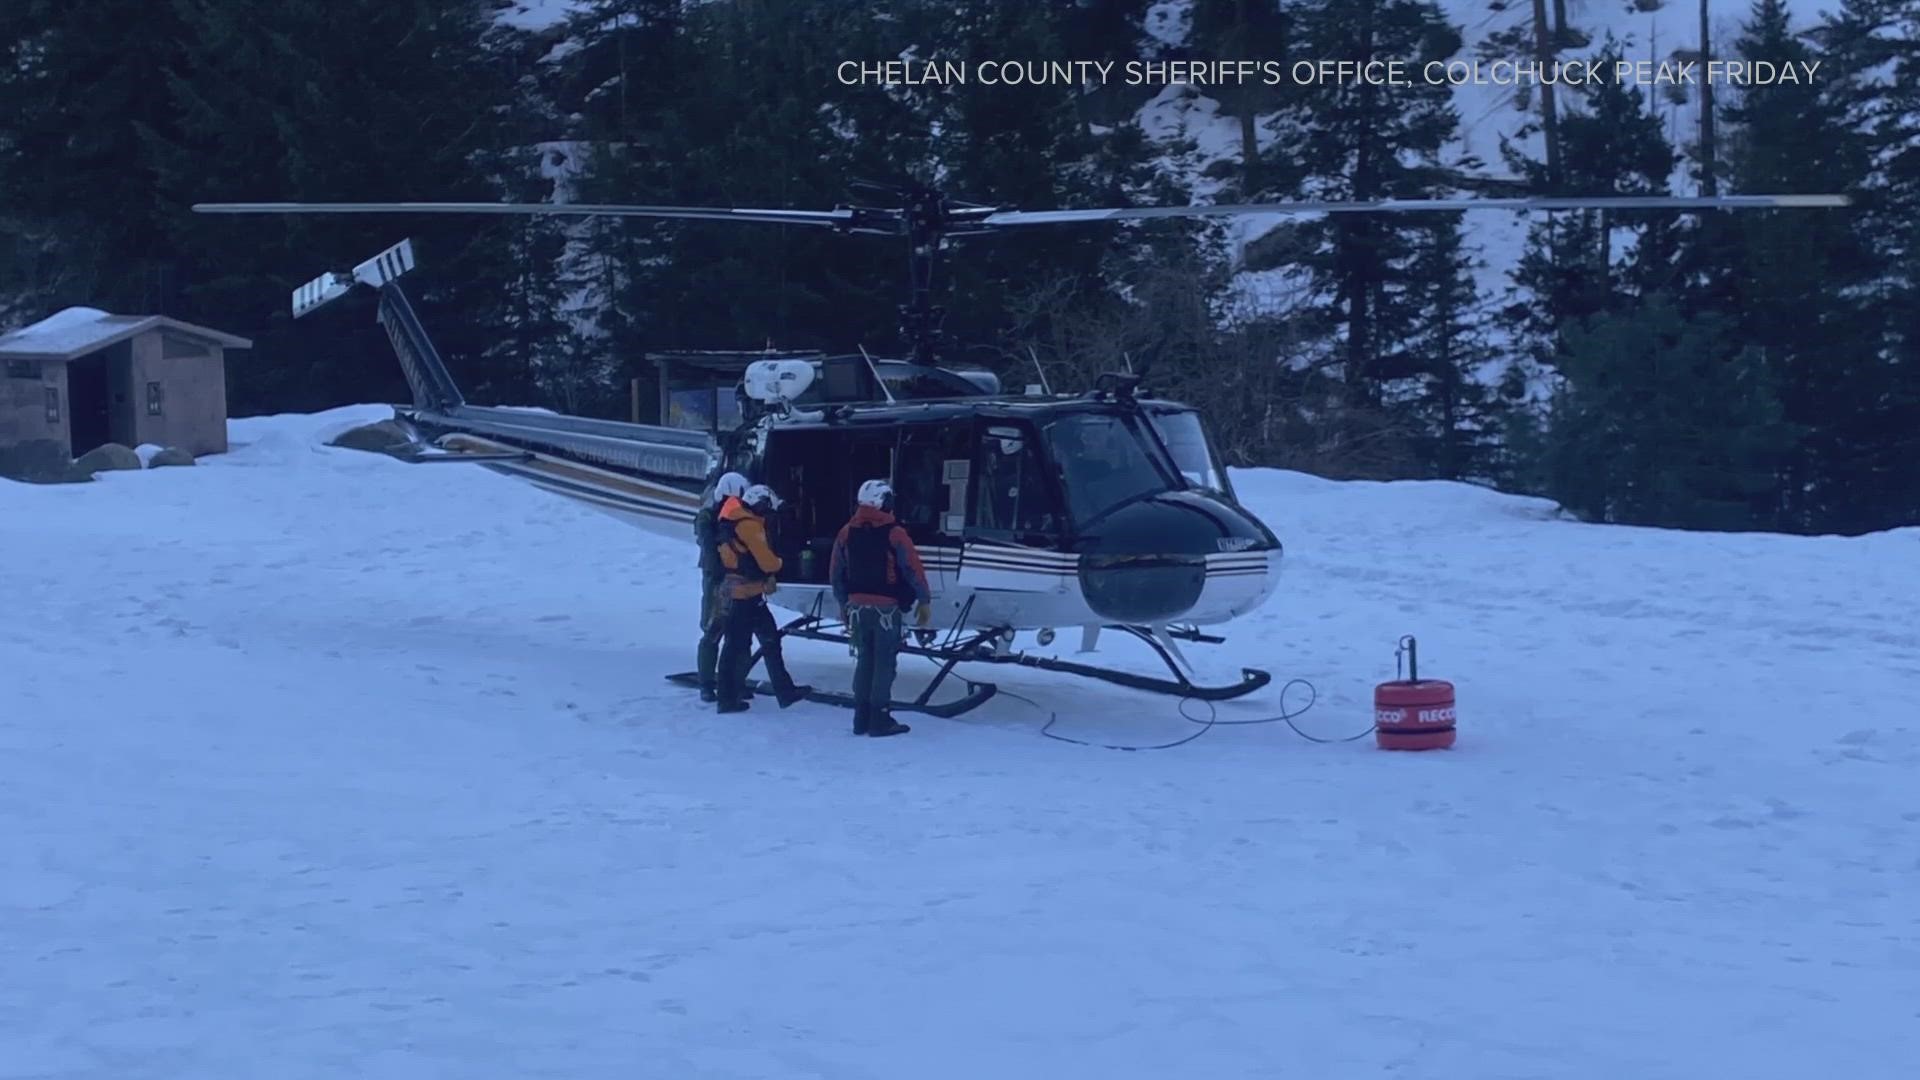 The body of Seong Cho, a 54-year-old Korean national residing in West Hartford, Connecticut was recovered at the base of Colchuck Peak.